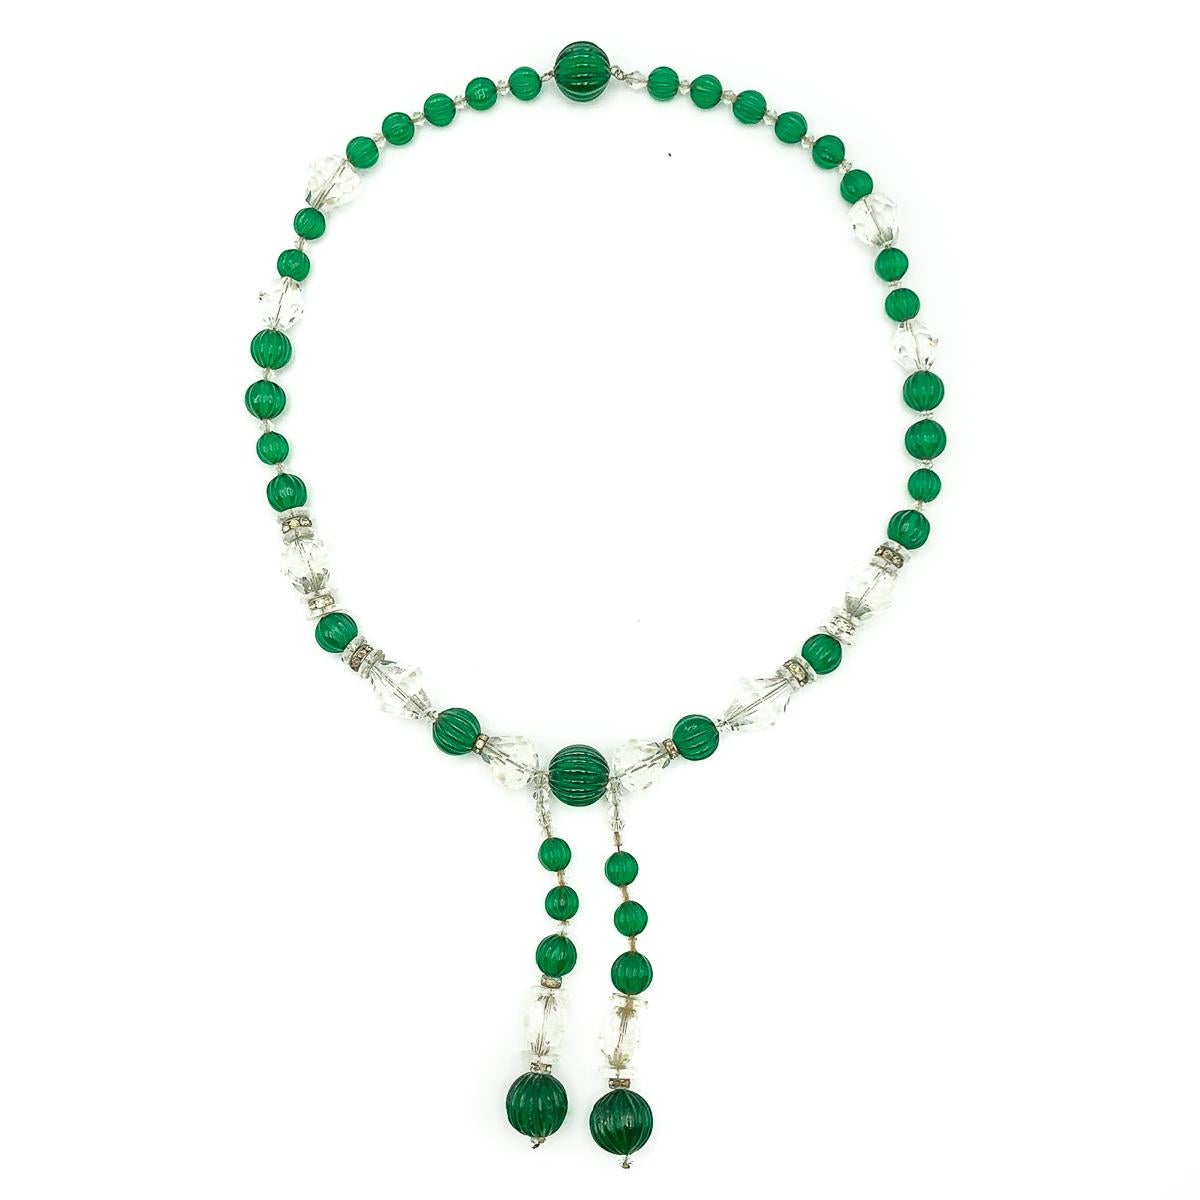 An exquisite and wonderfully rare French, Art Deco green glass sautoir dating to the 1920s. Featuring an impressive thirty six, hand made, emerald glass melon cut beads, in three sizes. Accompanied by delightful clear paste rondelles and a